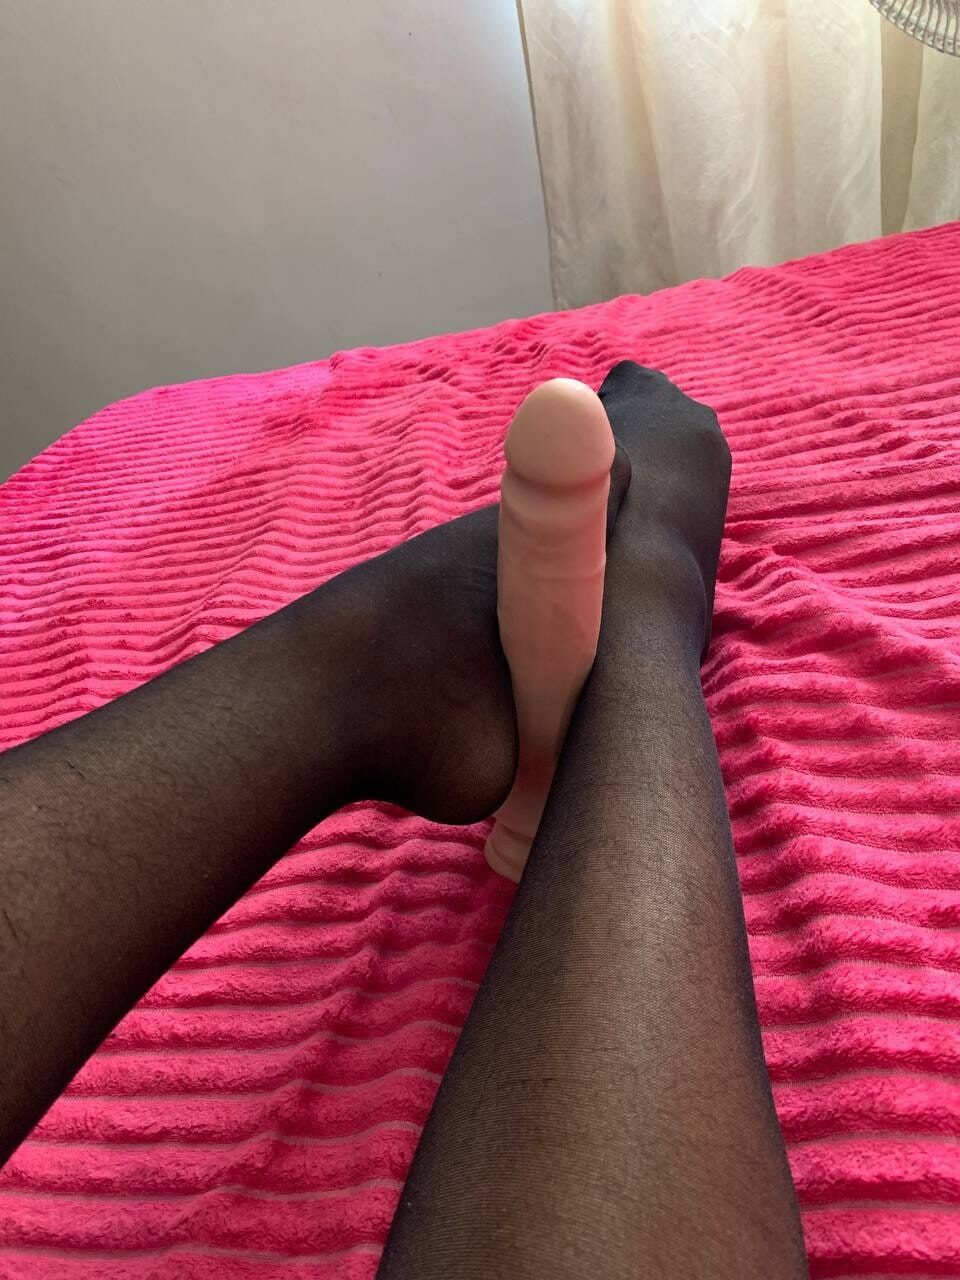 I want you to eat my beautiful feet  #6